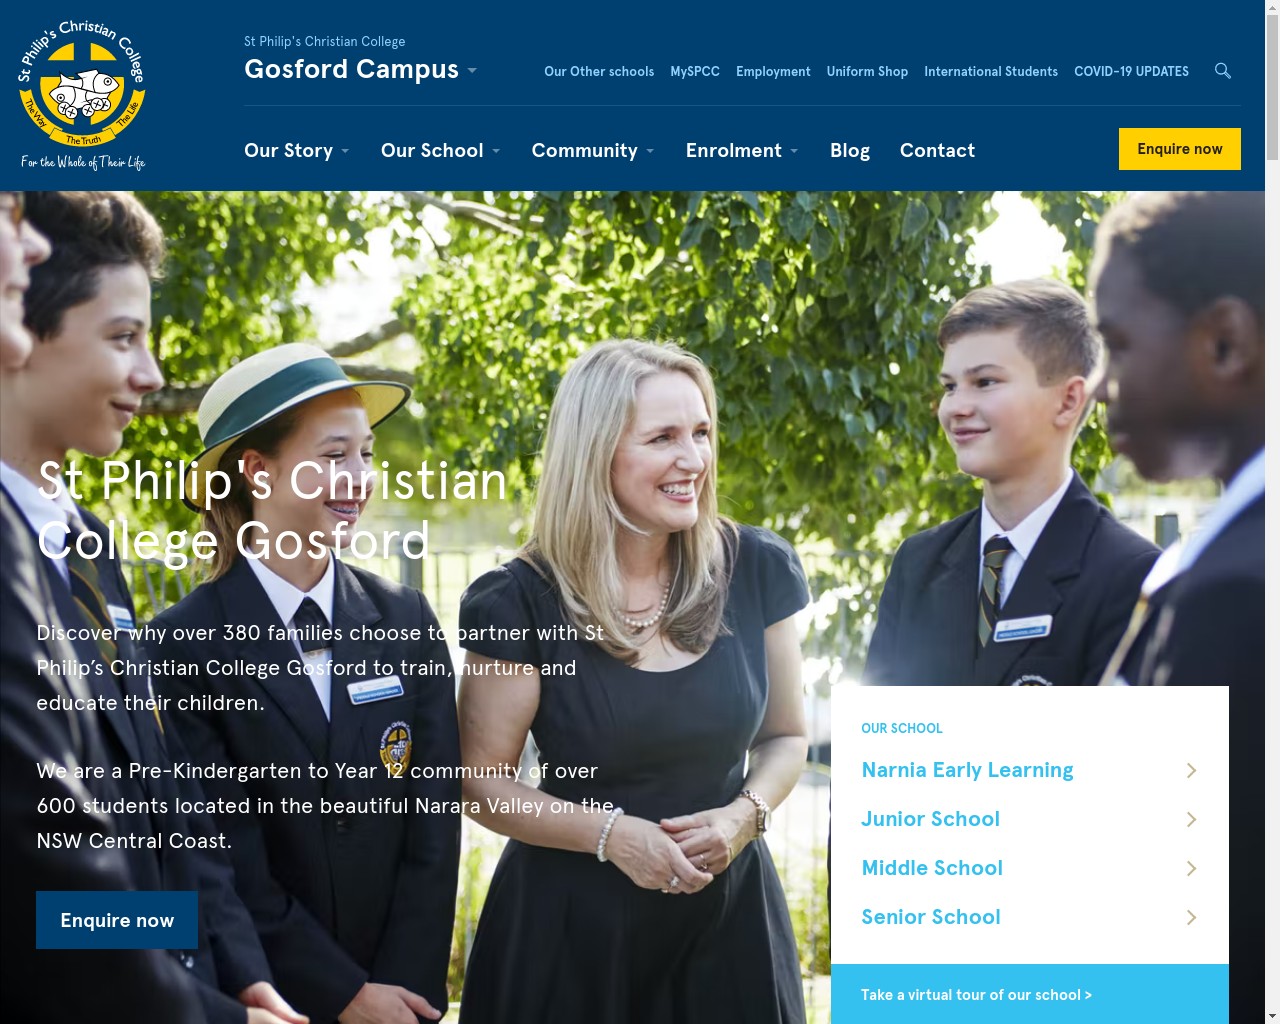 St Philips Christian College Gosford